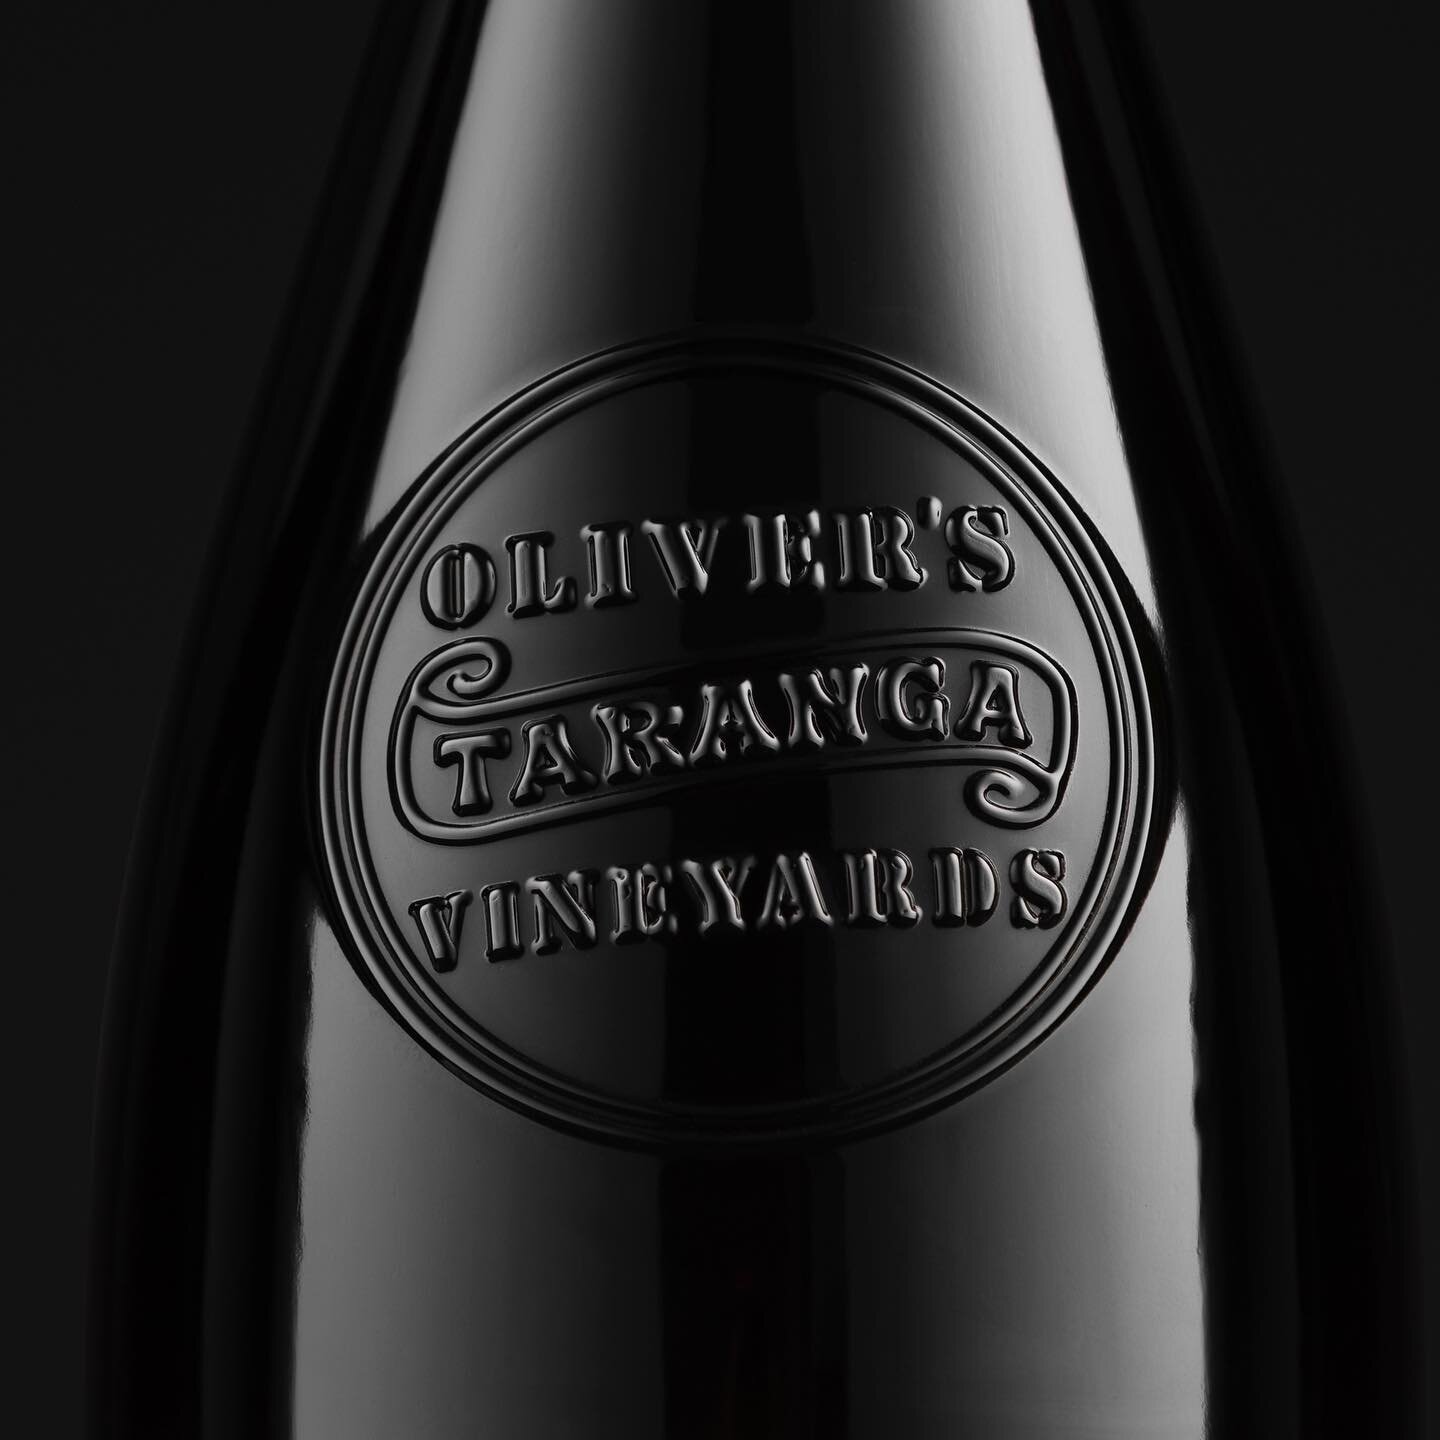 Up close and personal with the proprietary bottles that exclusively vessel &lsquo;The Greats&rsquo; ~ @oliverstaranga&rsquo;s new reserve series of wines. Produced by the artisans at @saverglassofficial. 
.
.
. #branding #adelaidebranding #thedesigne